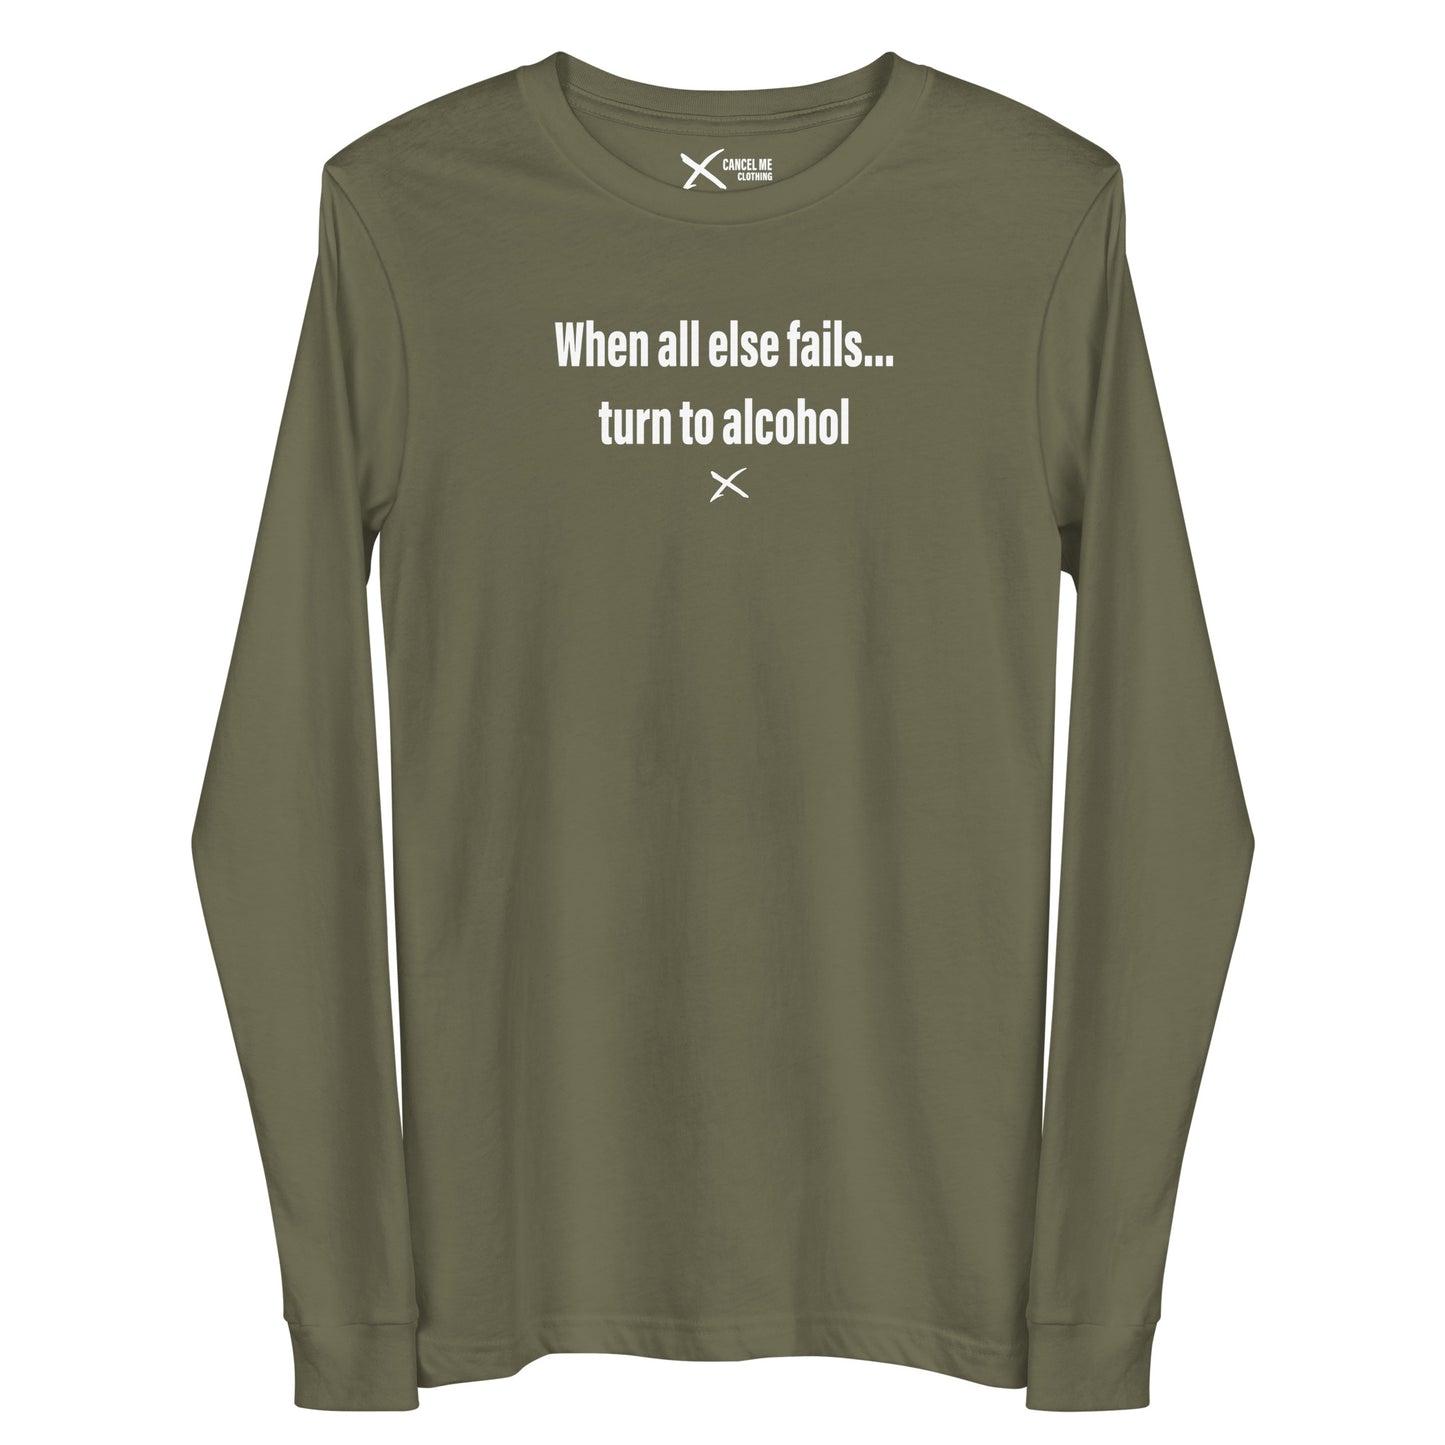 When all else fails... turn to alcohol - Longsleeve